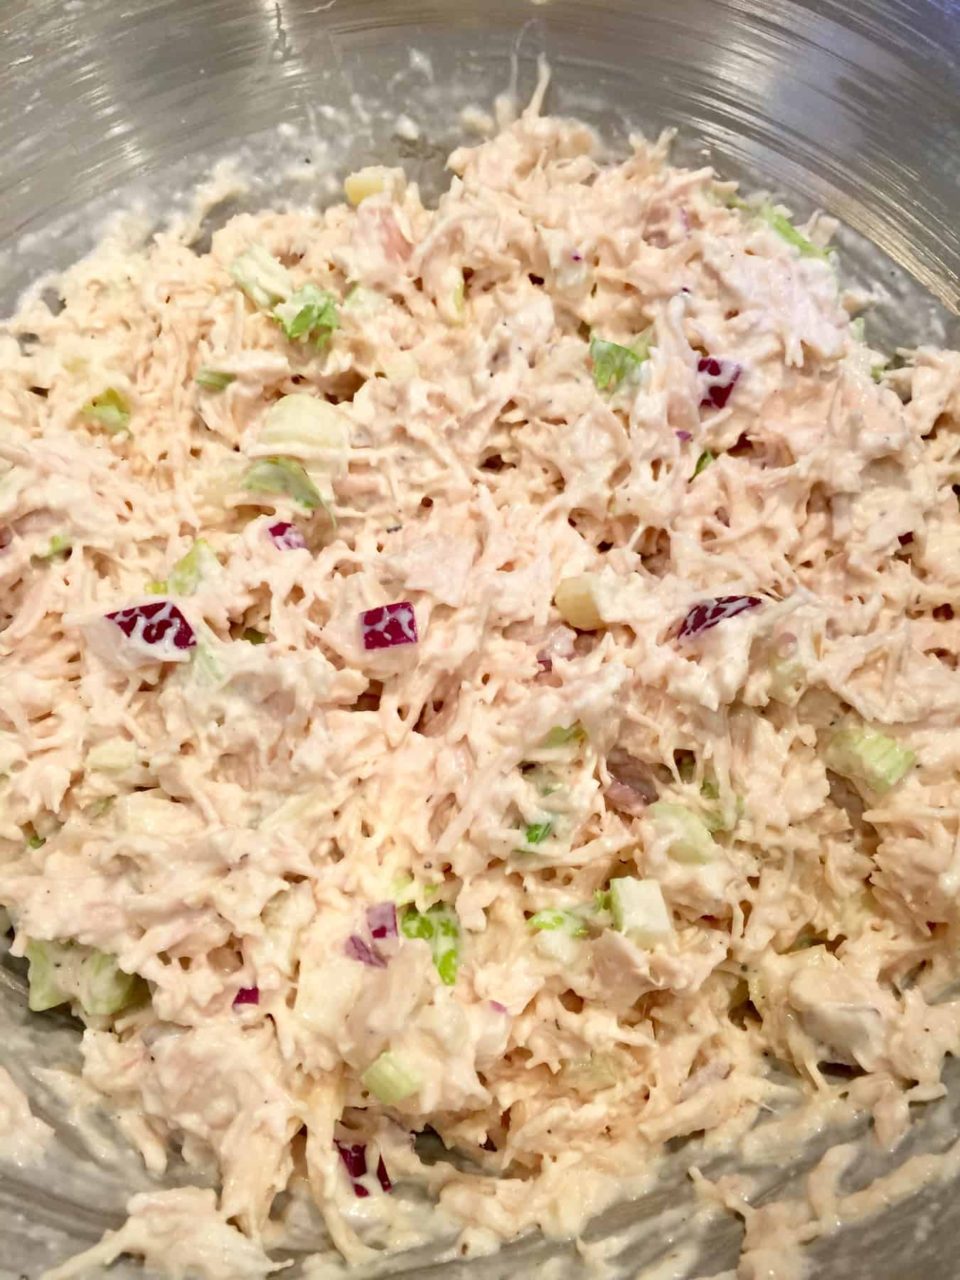 Finished up close photo of Best Chicken Salad Ever in a bowl.